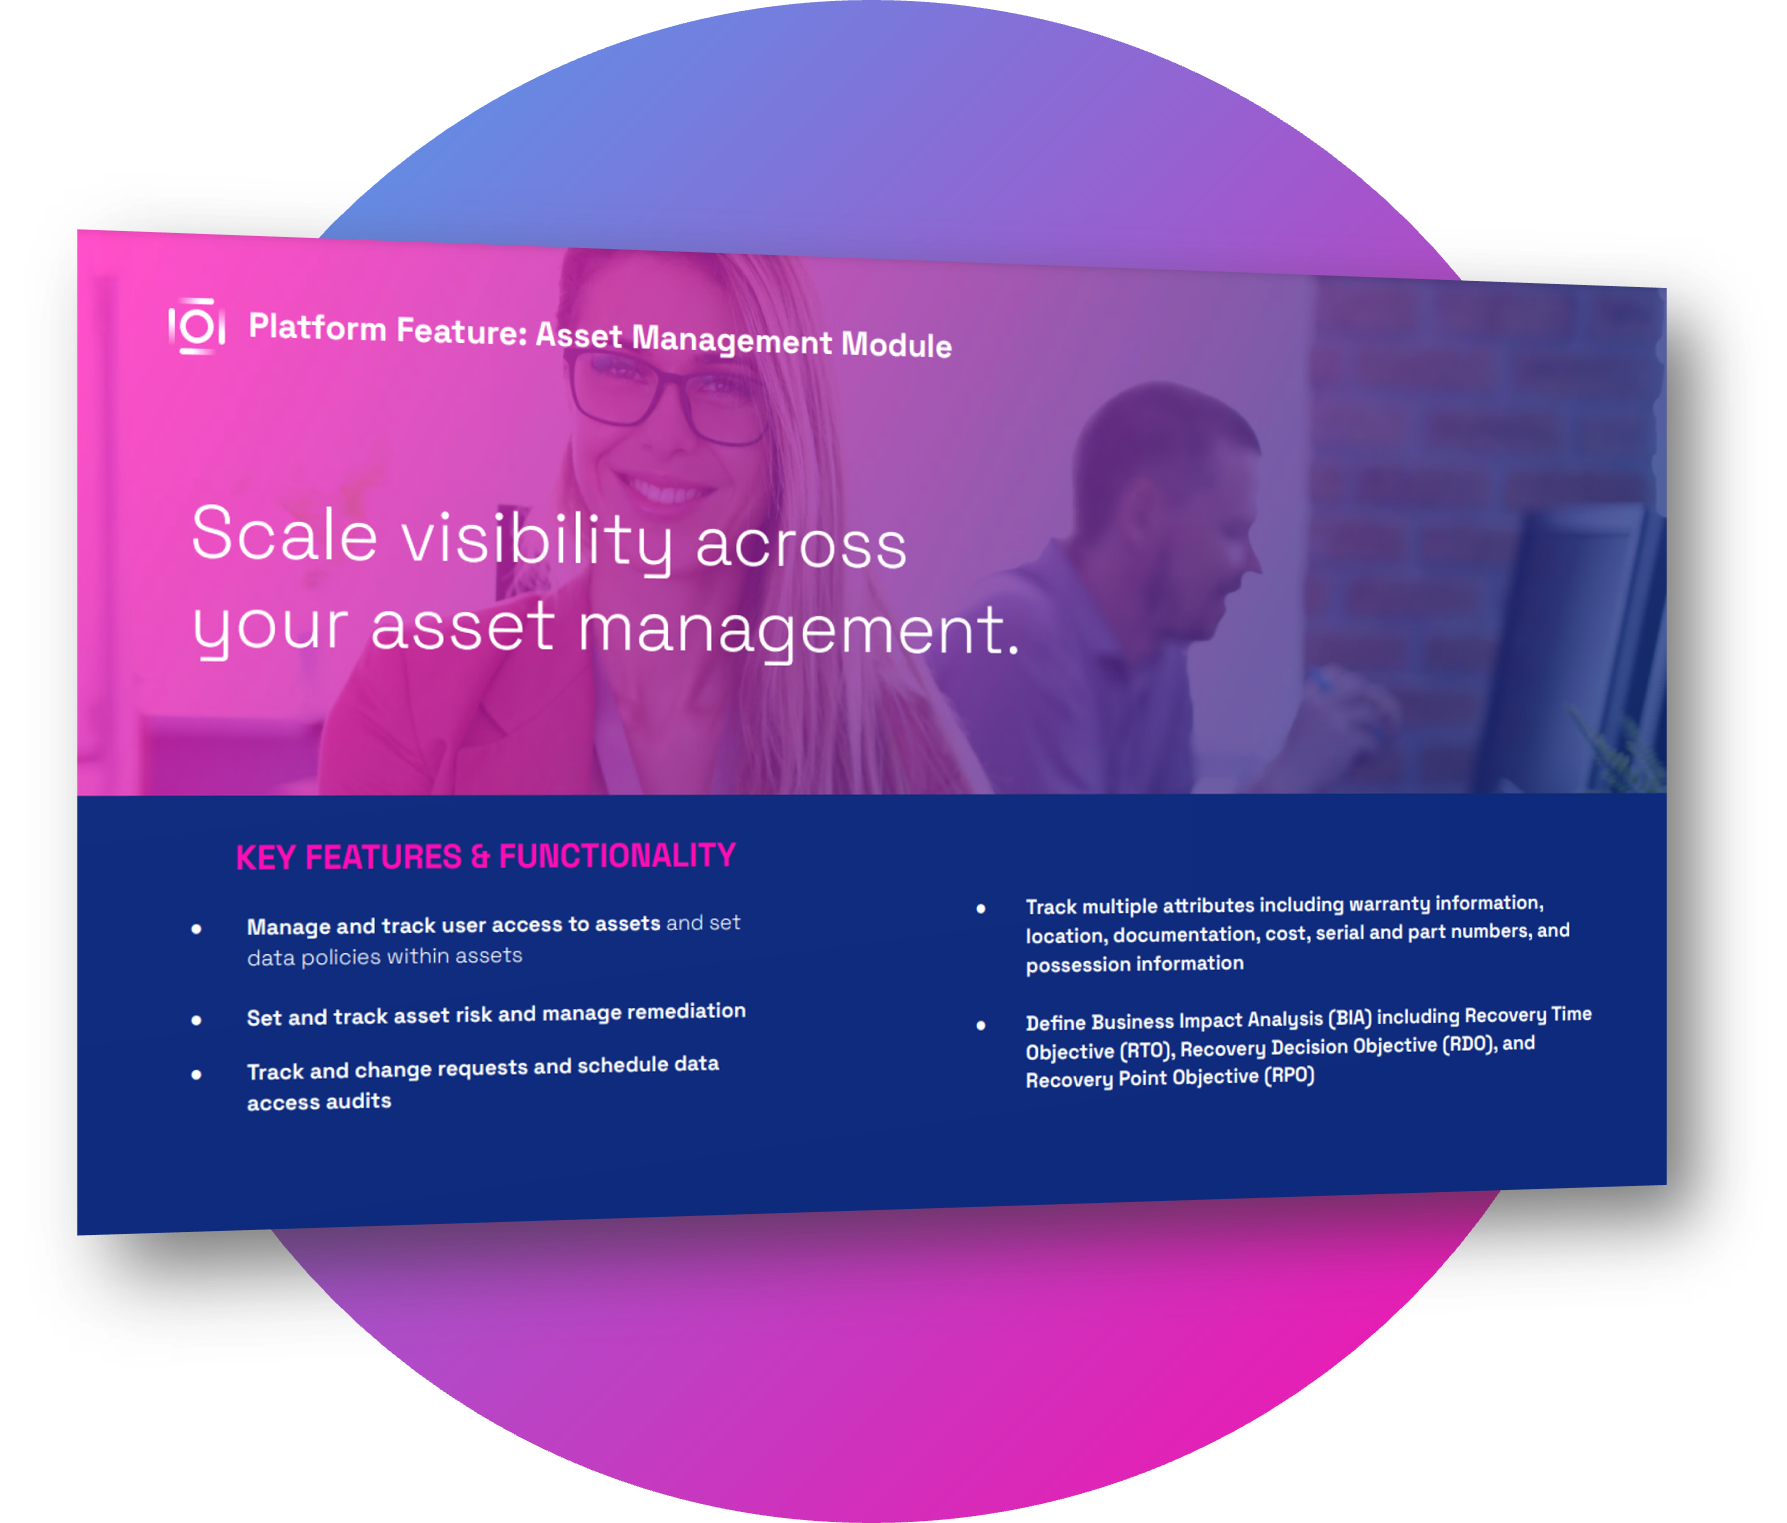 Scale visibility across your asset management